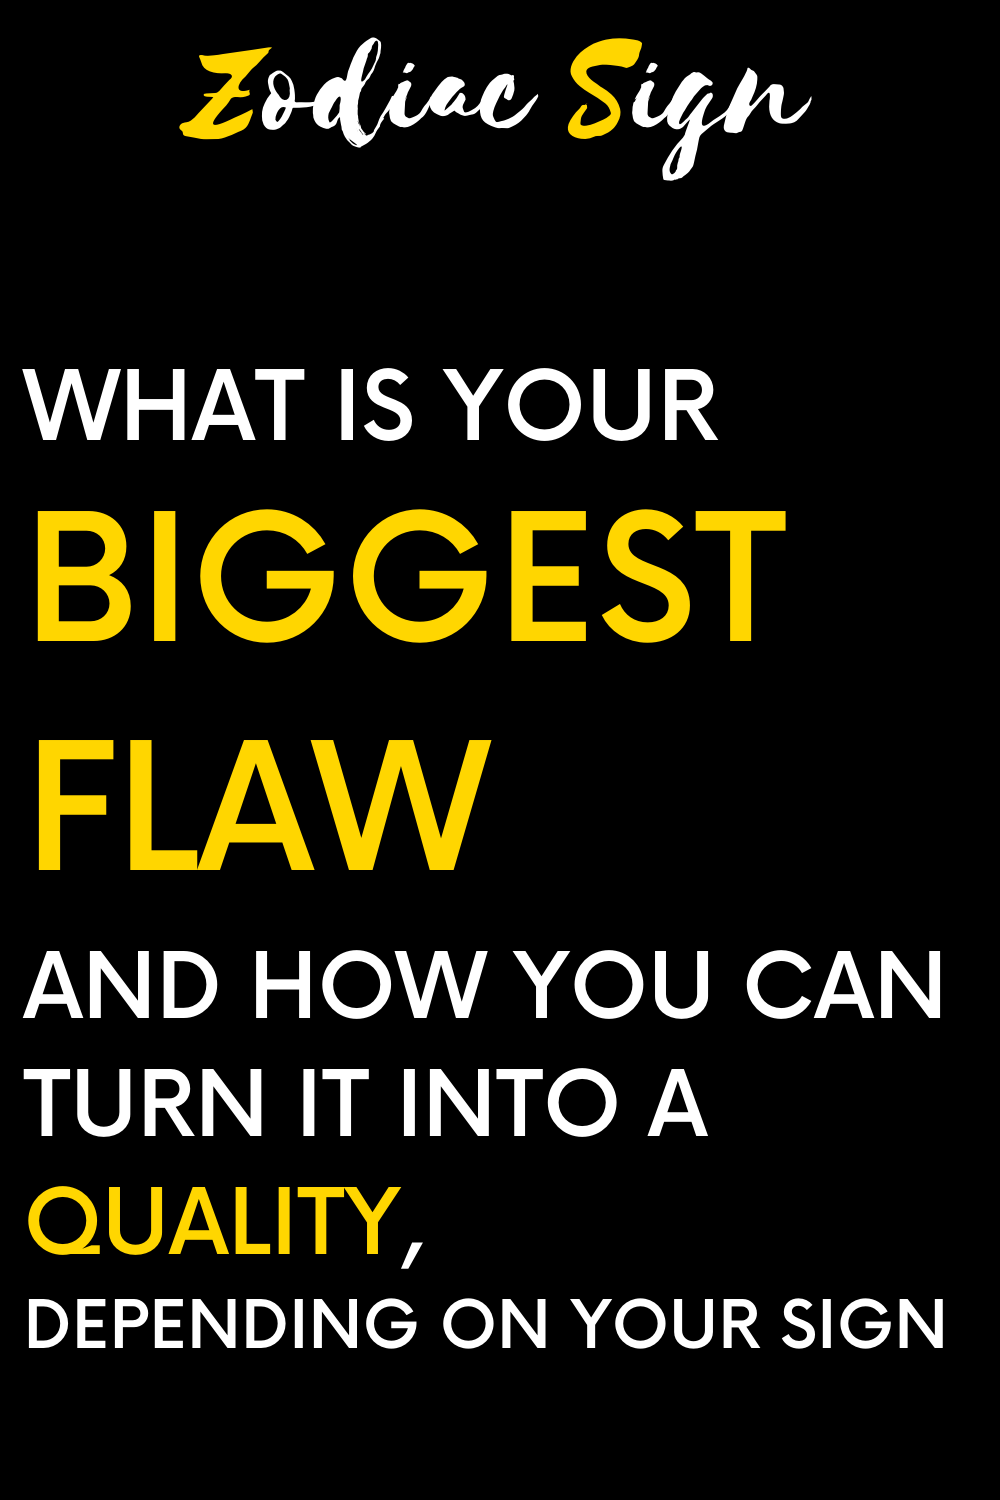 What is your biggest flaw and how you can turn it into a quality, depending on your sign